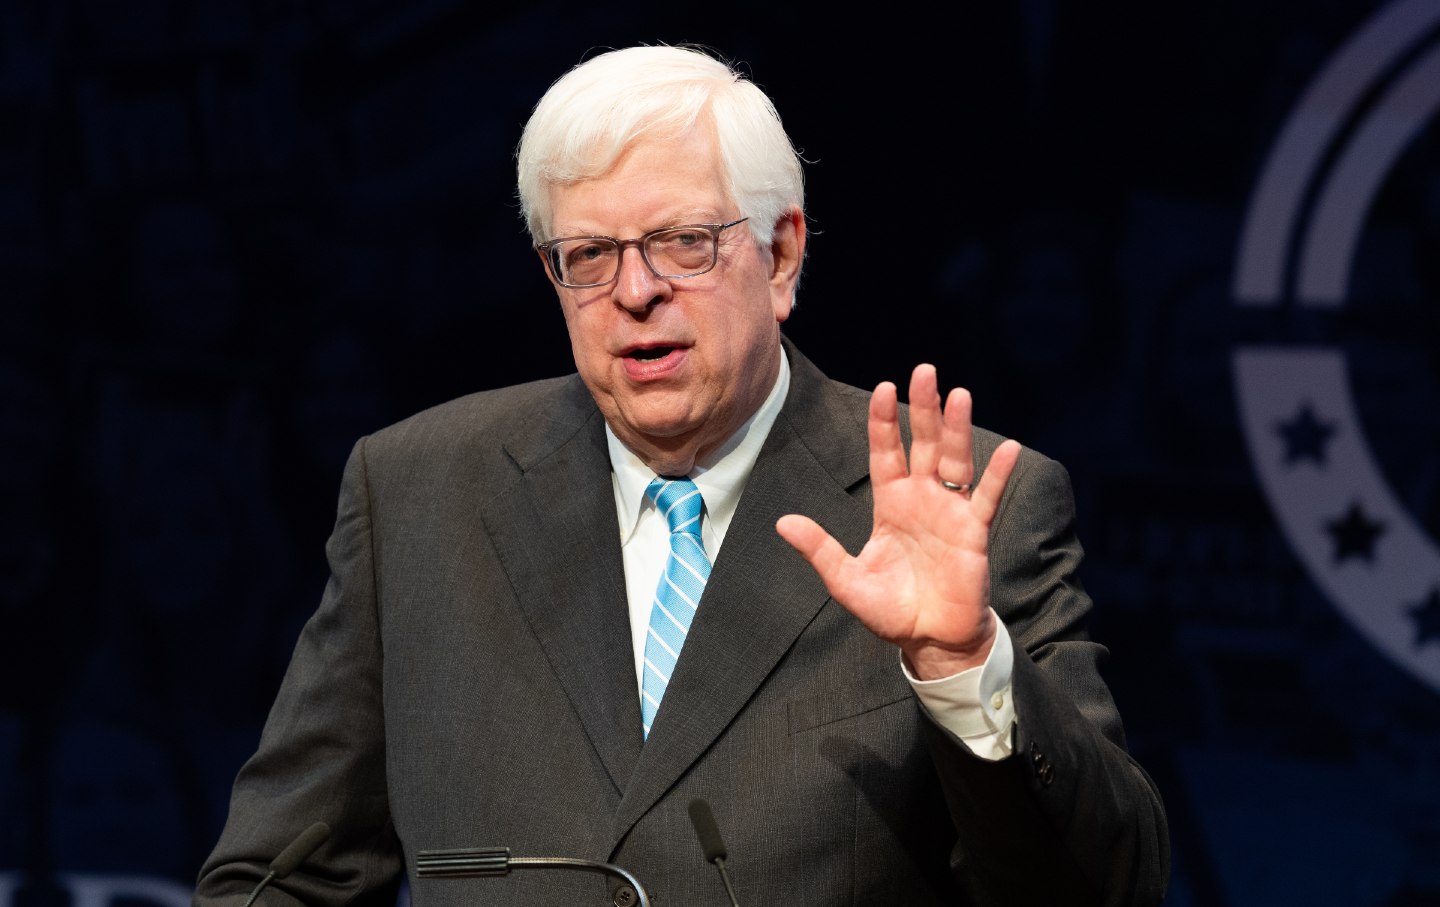 Dennis Prager, conservative radio talk show host and writer, speaks at a Turning Point USA summit.